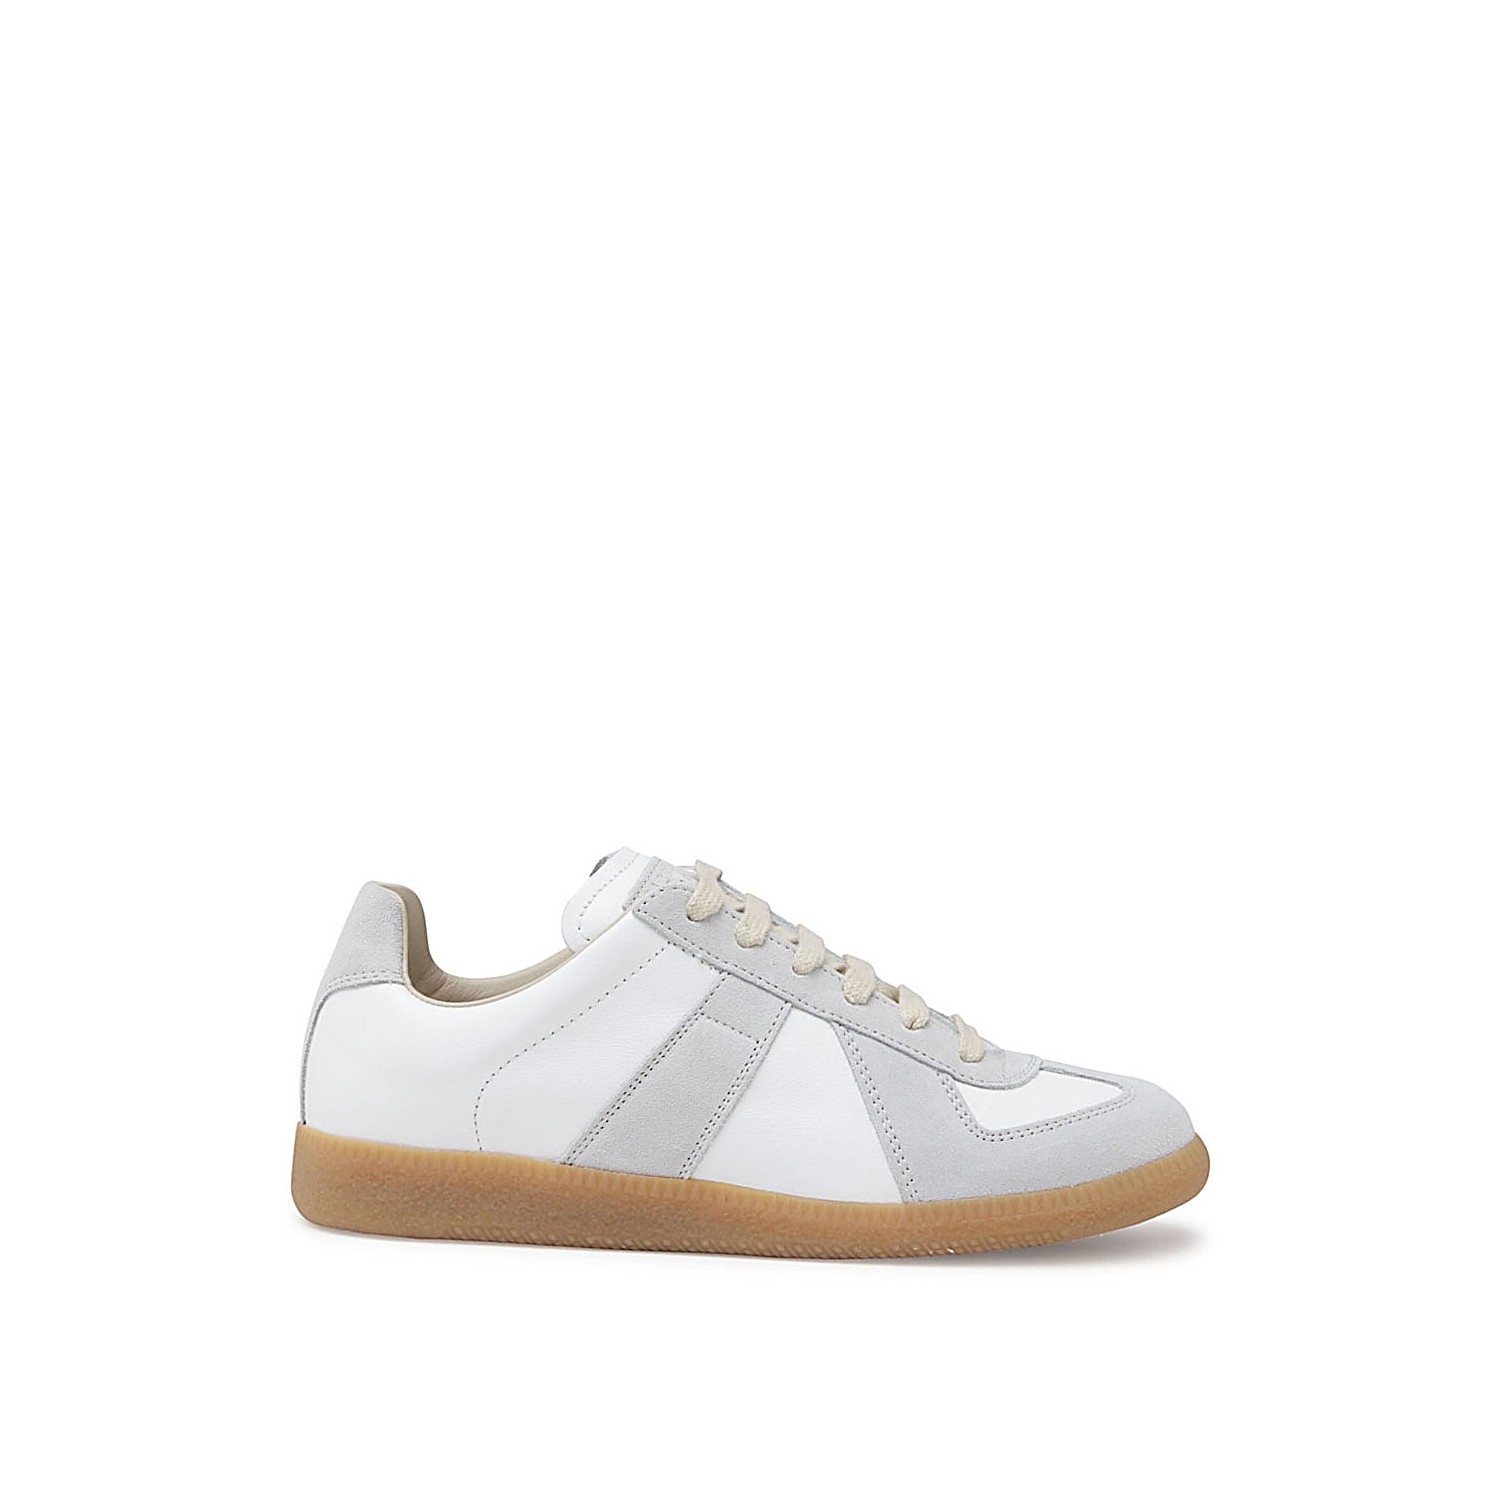 OFF WHITE LEATHER AND GREY SUEDE REPLICA SNEAKERS - 1